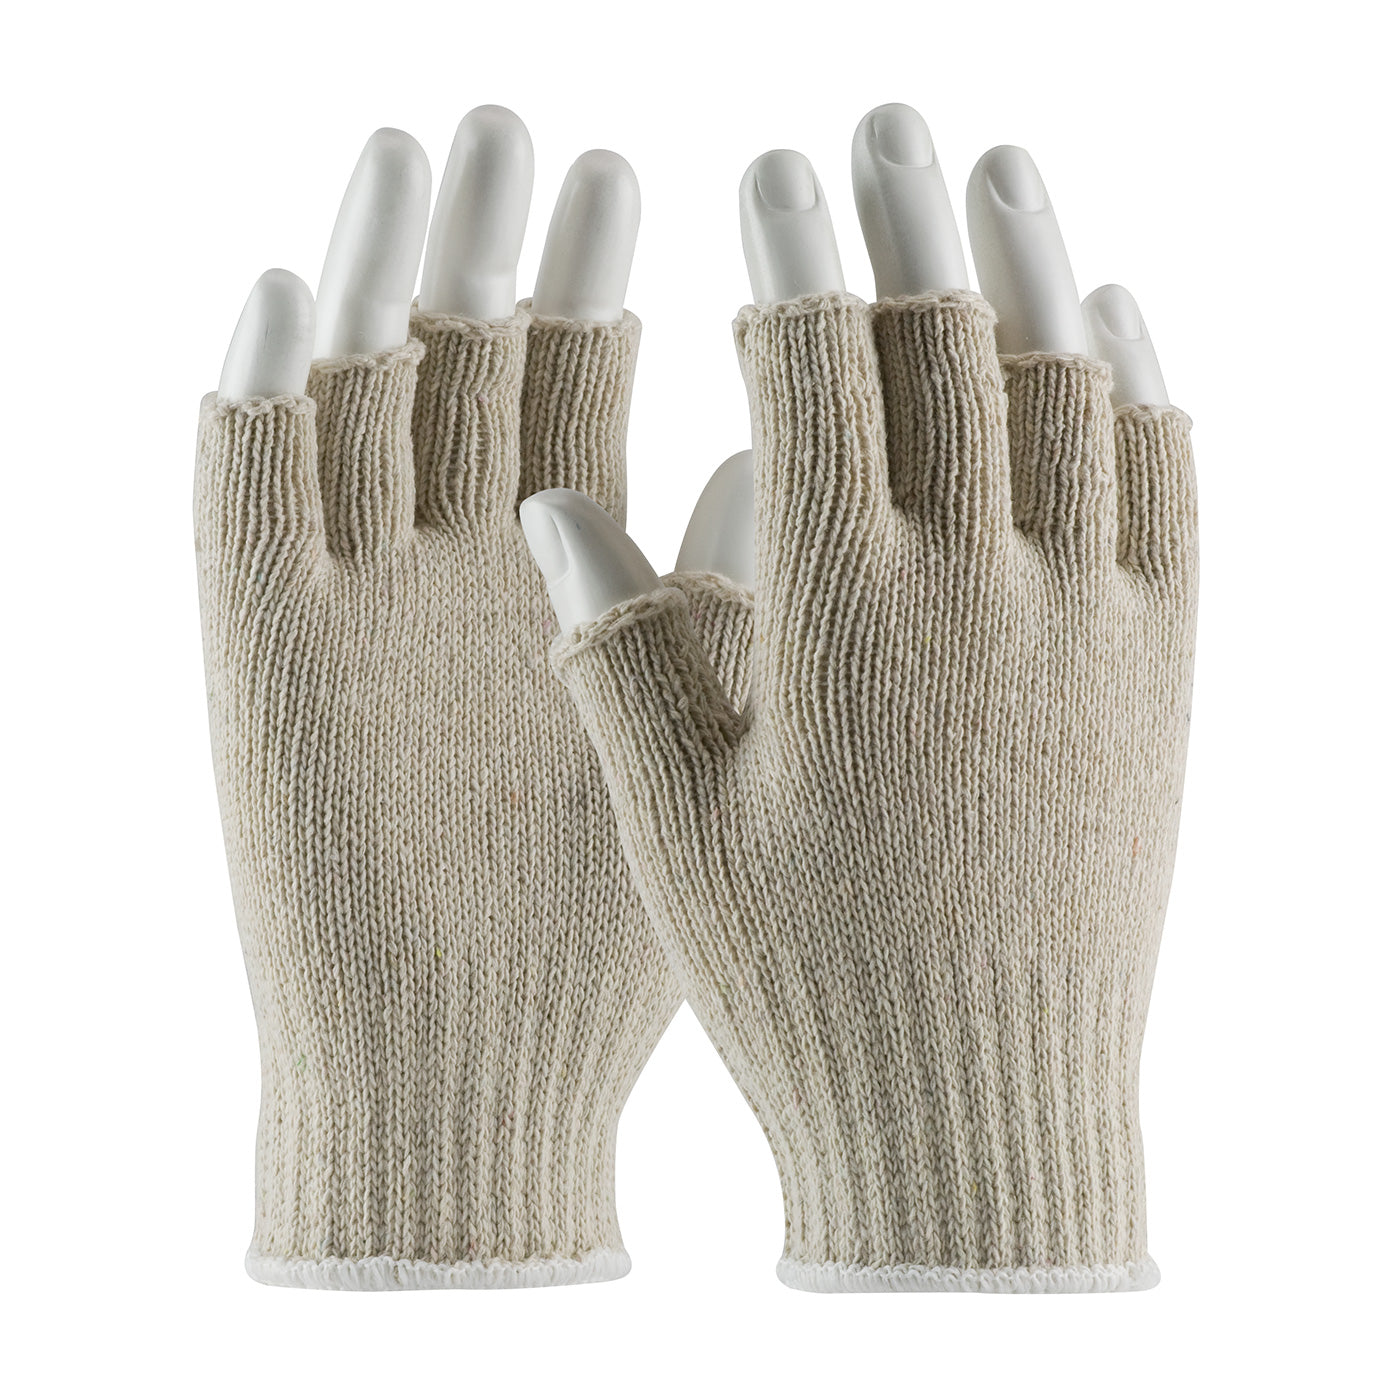 PIP 35-C119/L Medium Weight Seamless Knit Cotton/Polyester Glove - Natural with Half-Finger